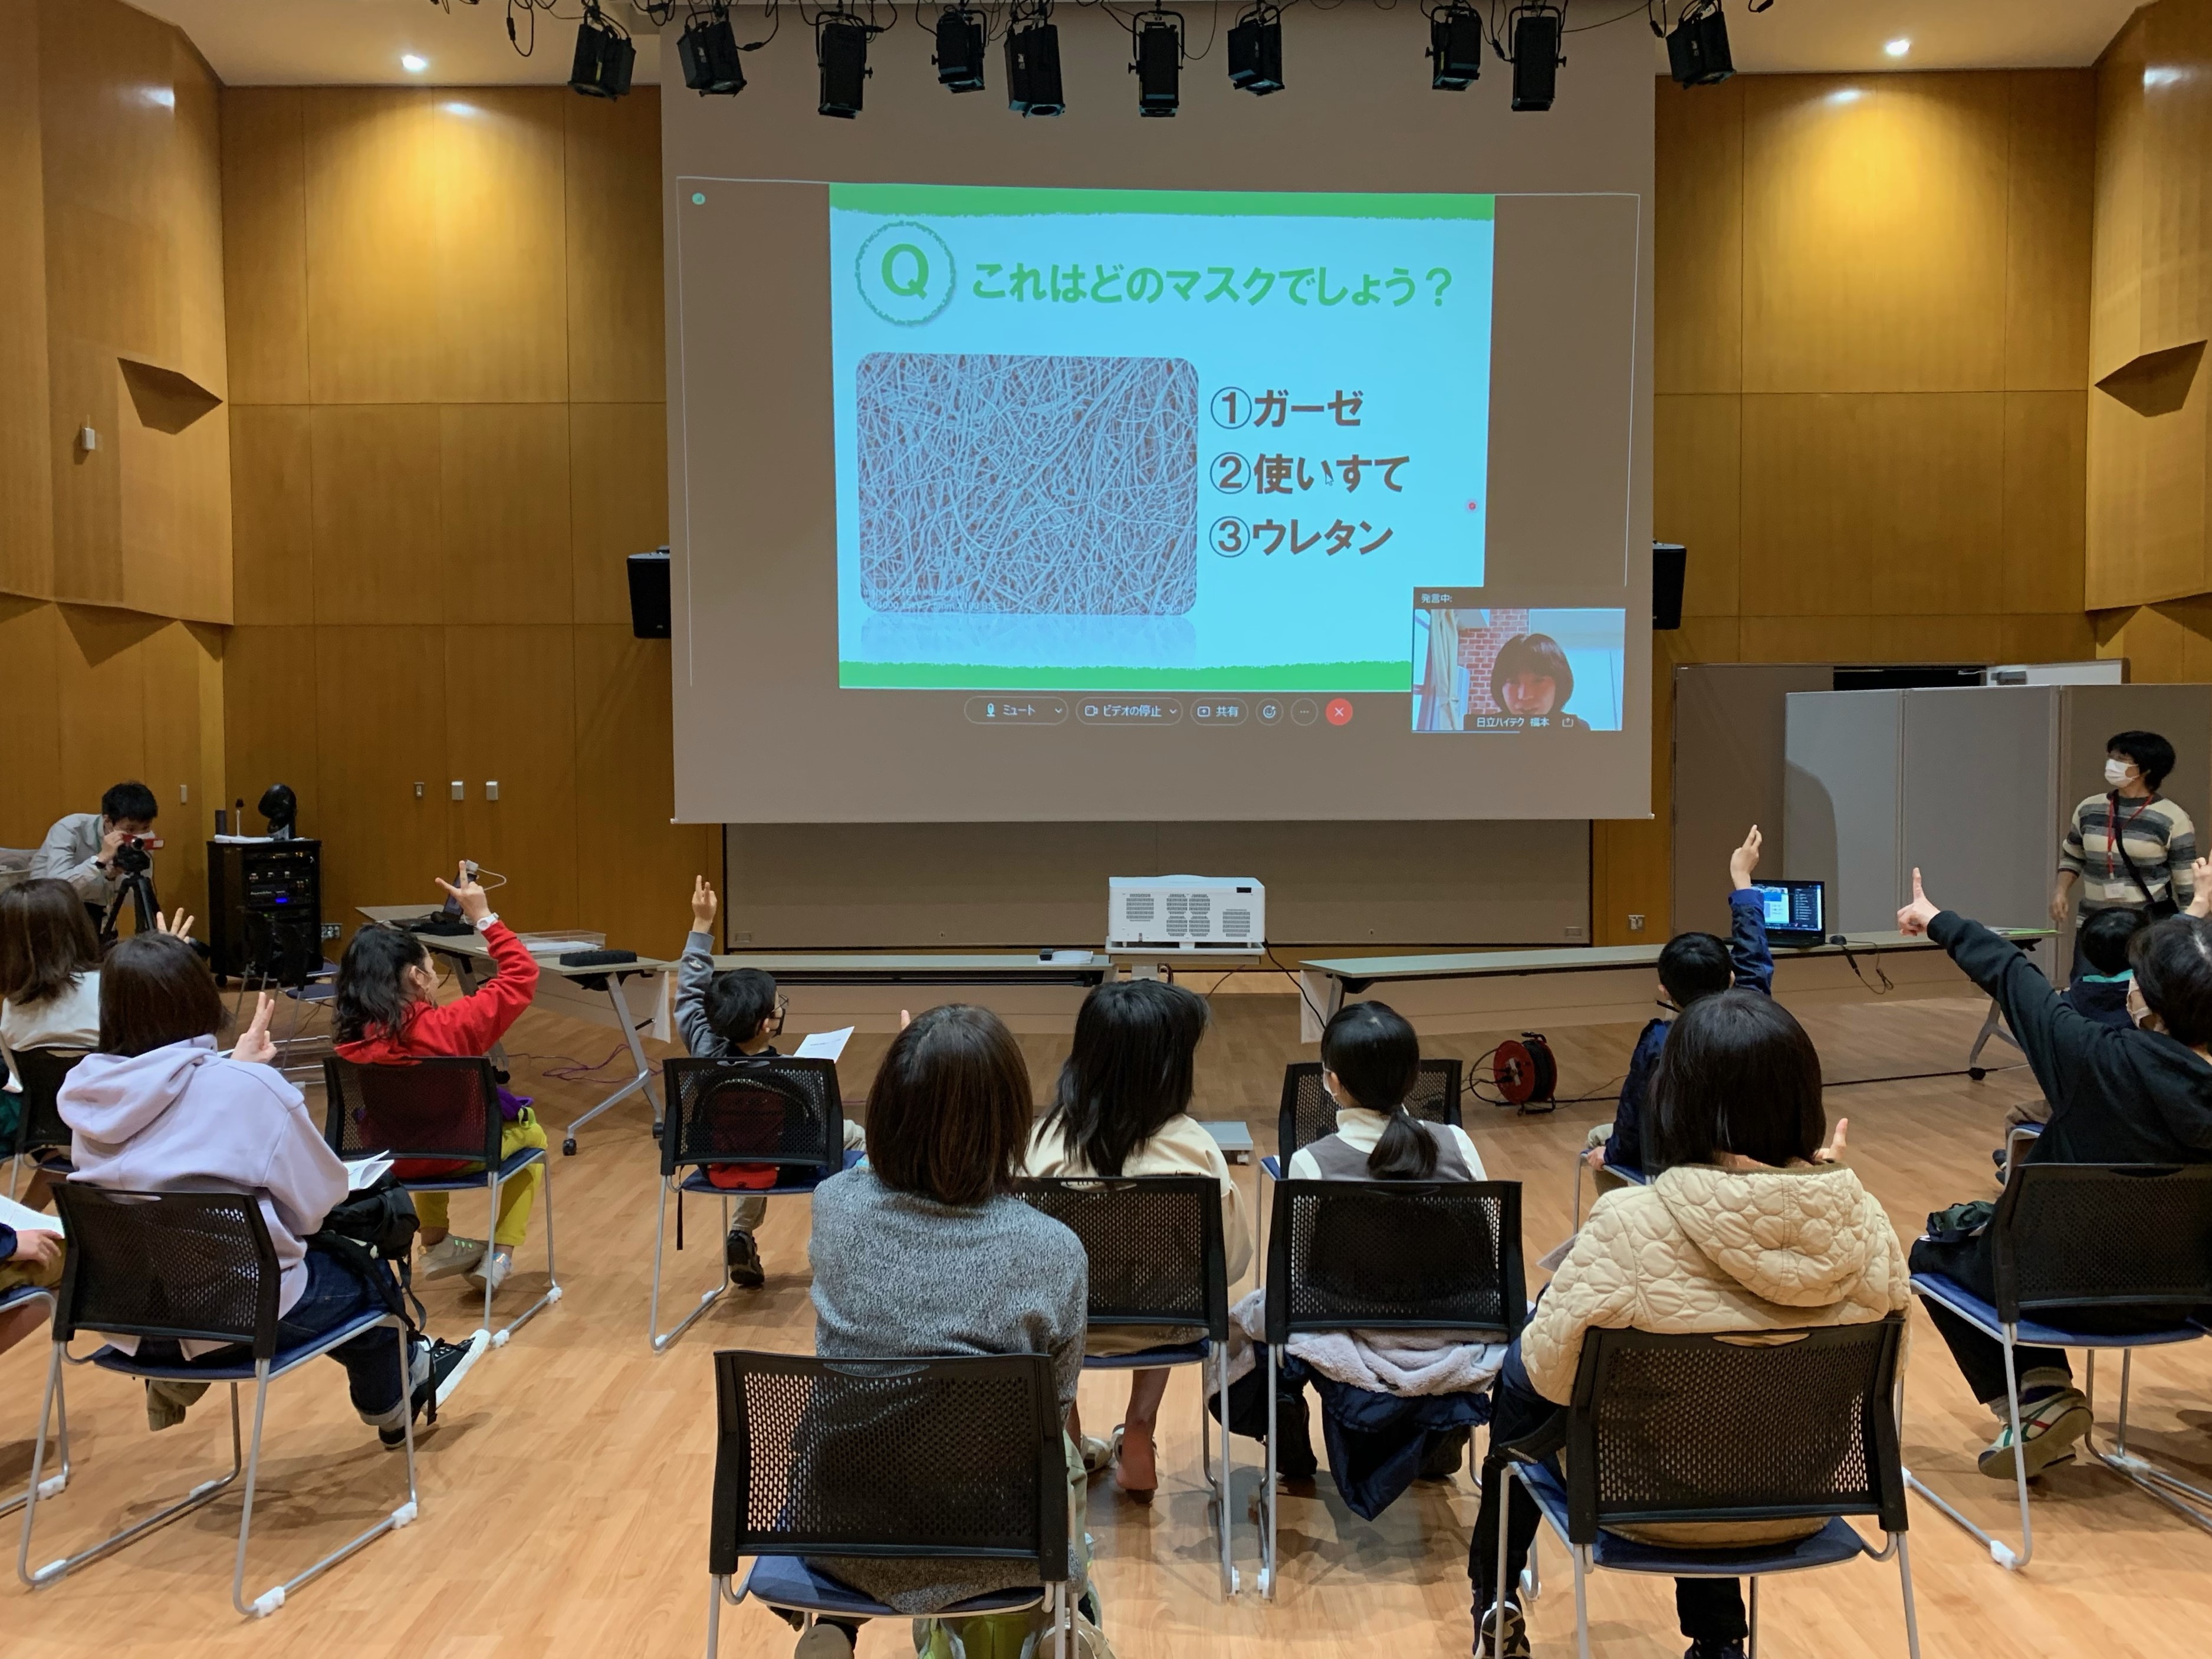 Spring Holiday Remote Electron Microscope Event held at Science Café Itami